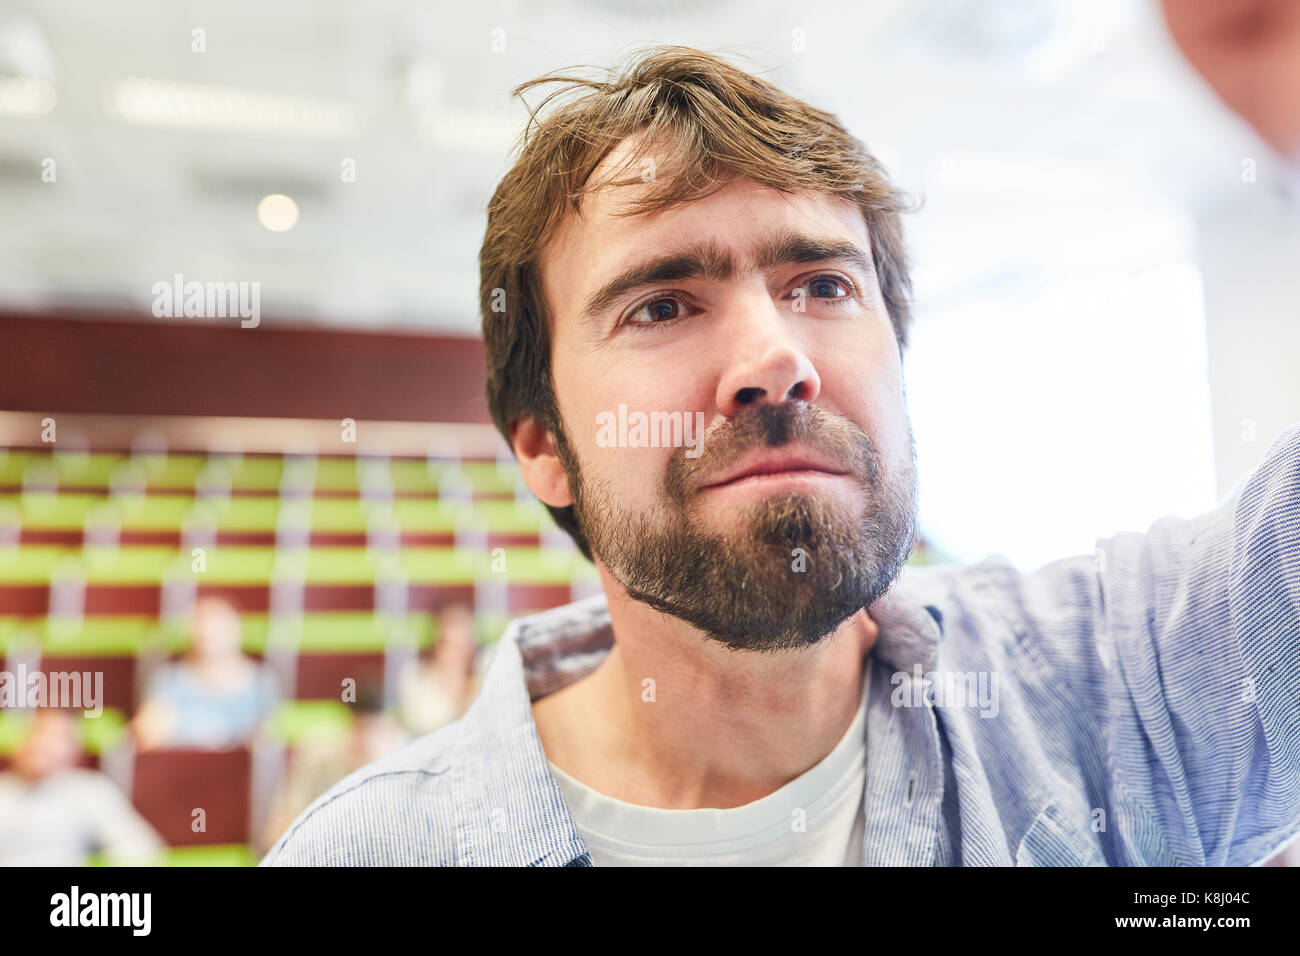 Teacher or lecturer in university or college lecture hall with students Stock Photo